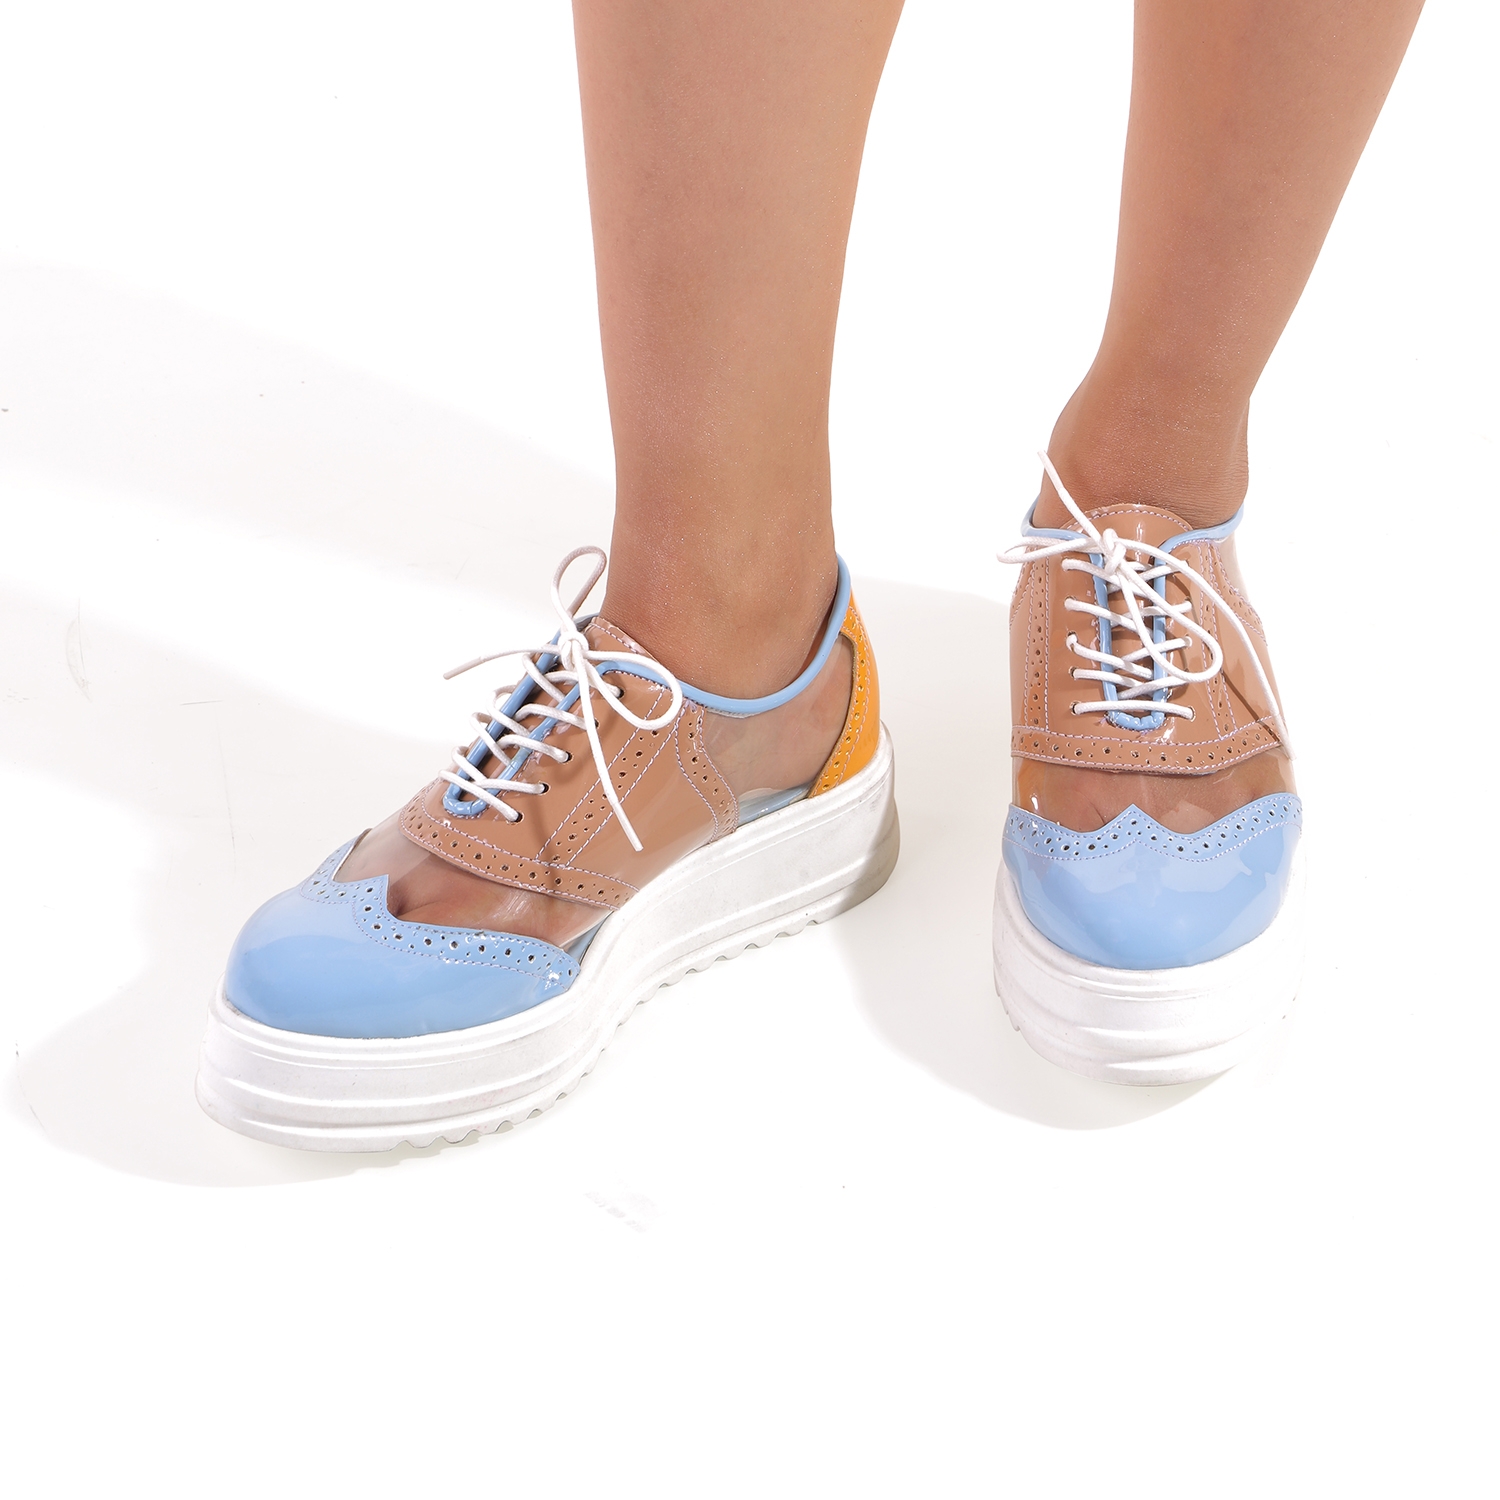 CATWALK | Dual-toned Cut-out Sneakers